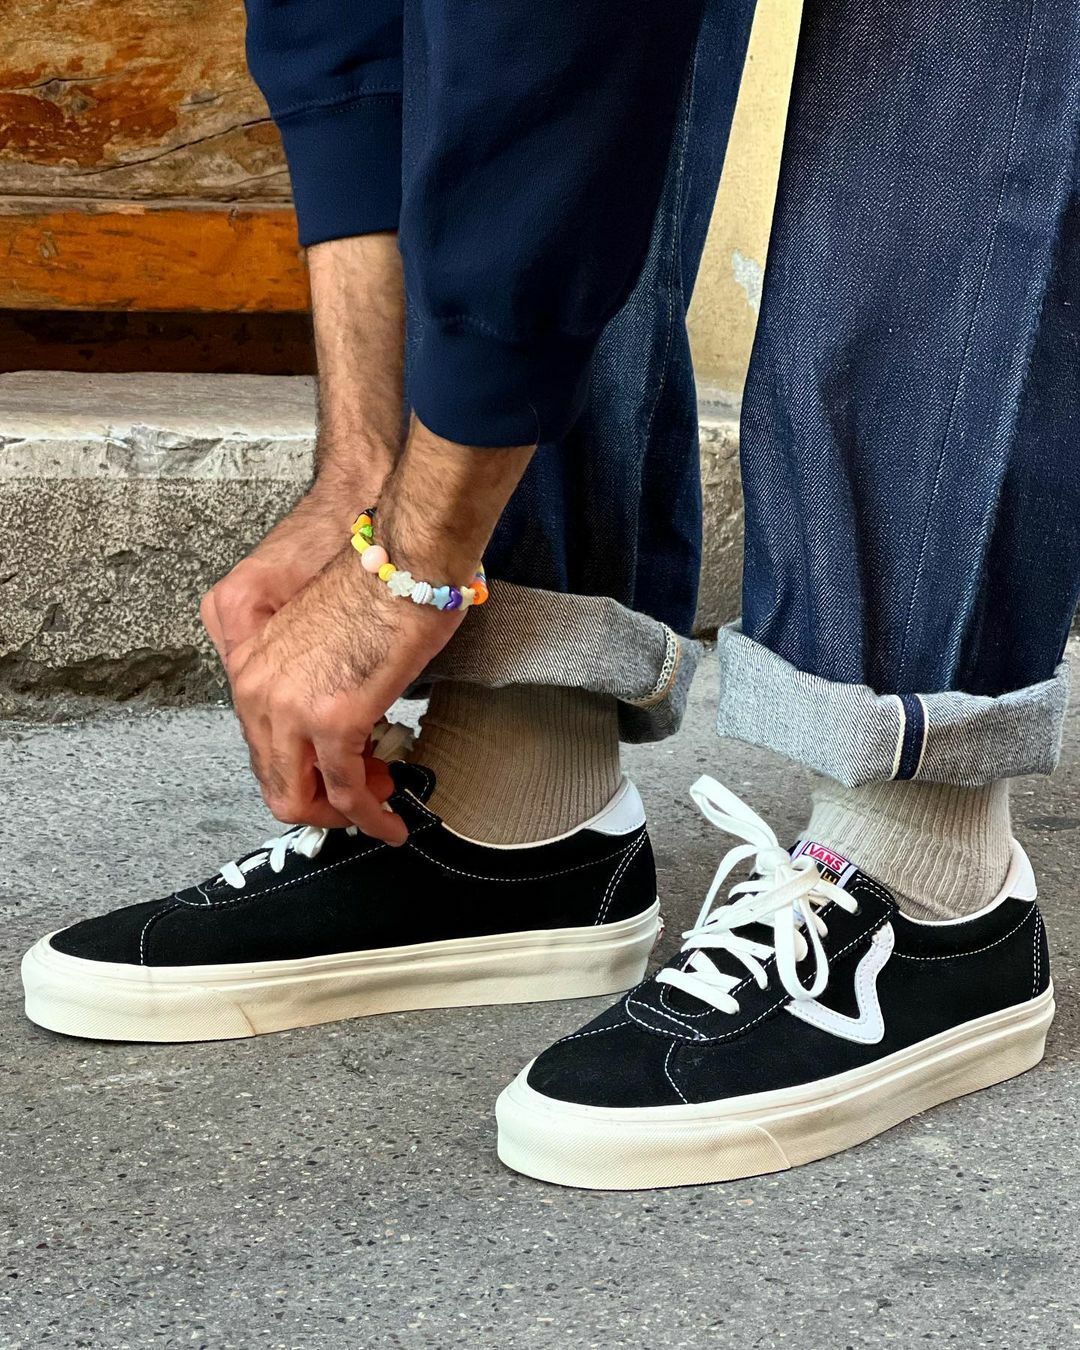 Terminal Reach out unstable Vans Styles, Fit and History | Vans Buyers Guide - AllSole